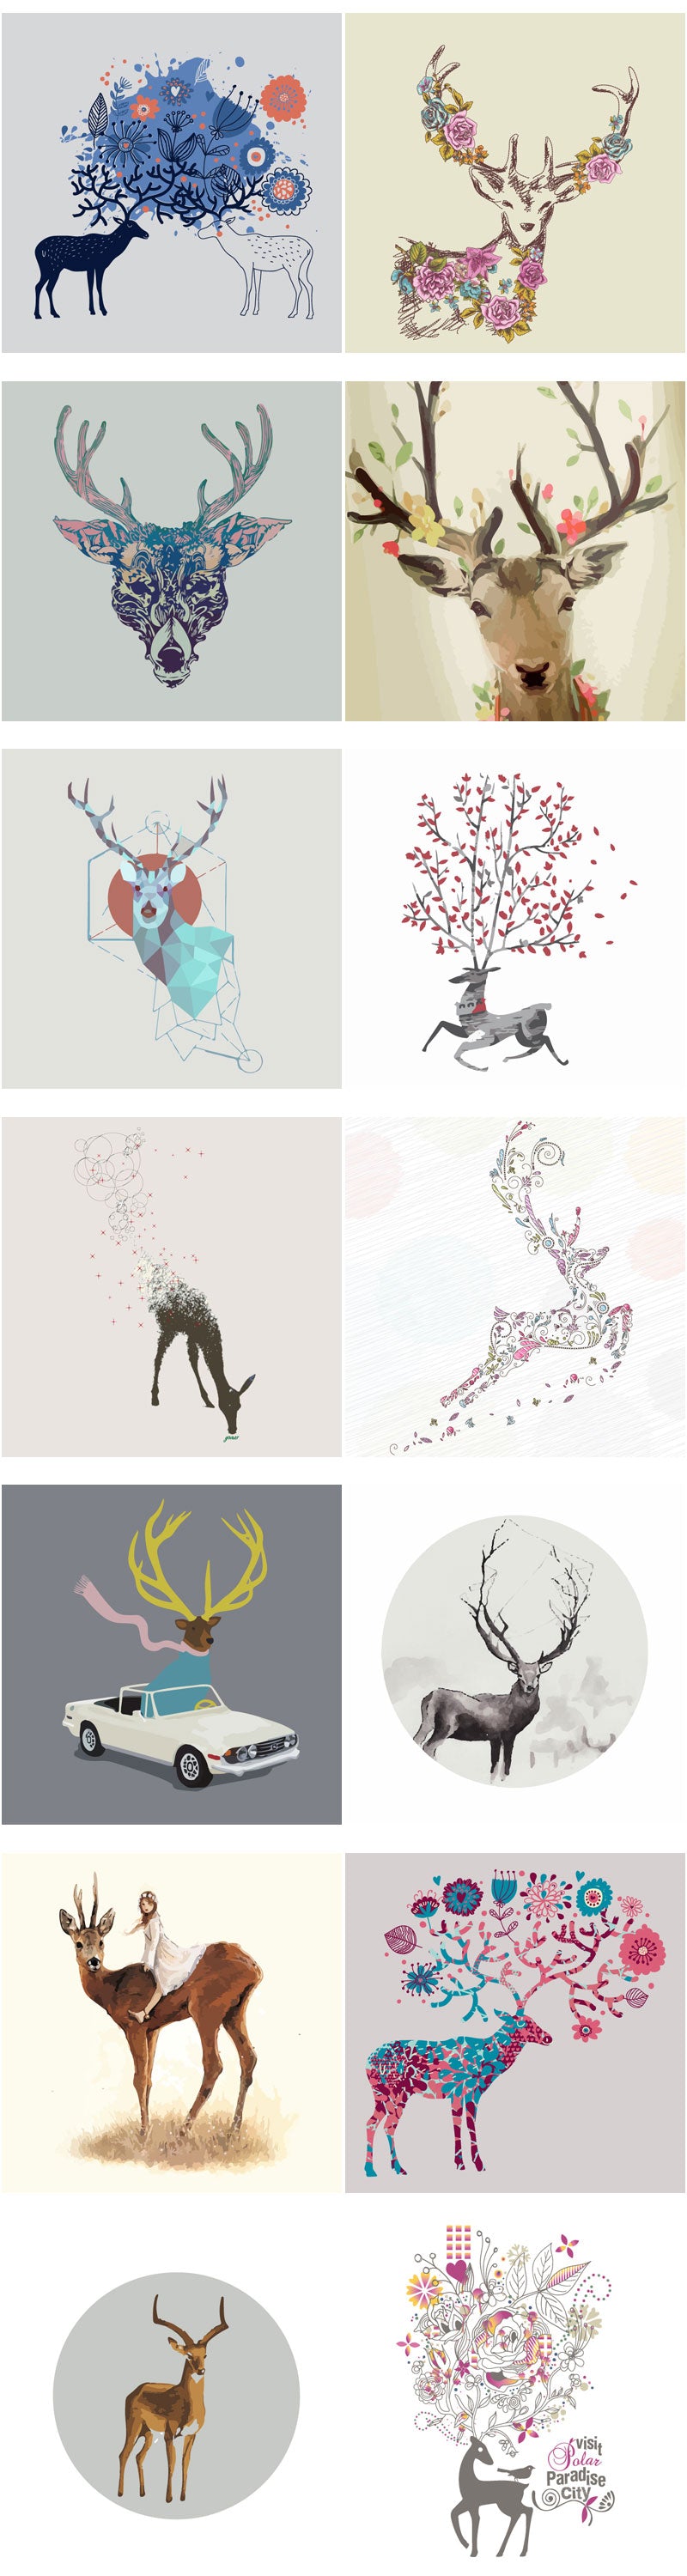 Download Deer Vector AI Files  “AI” files can be used in any art design.